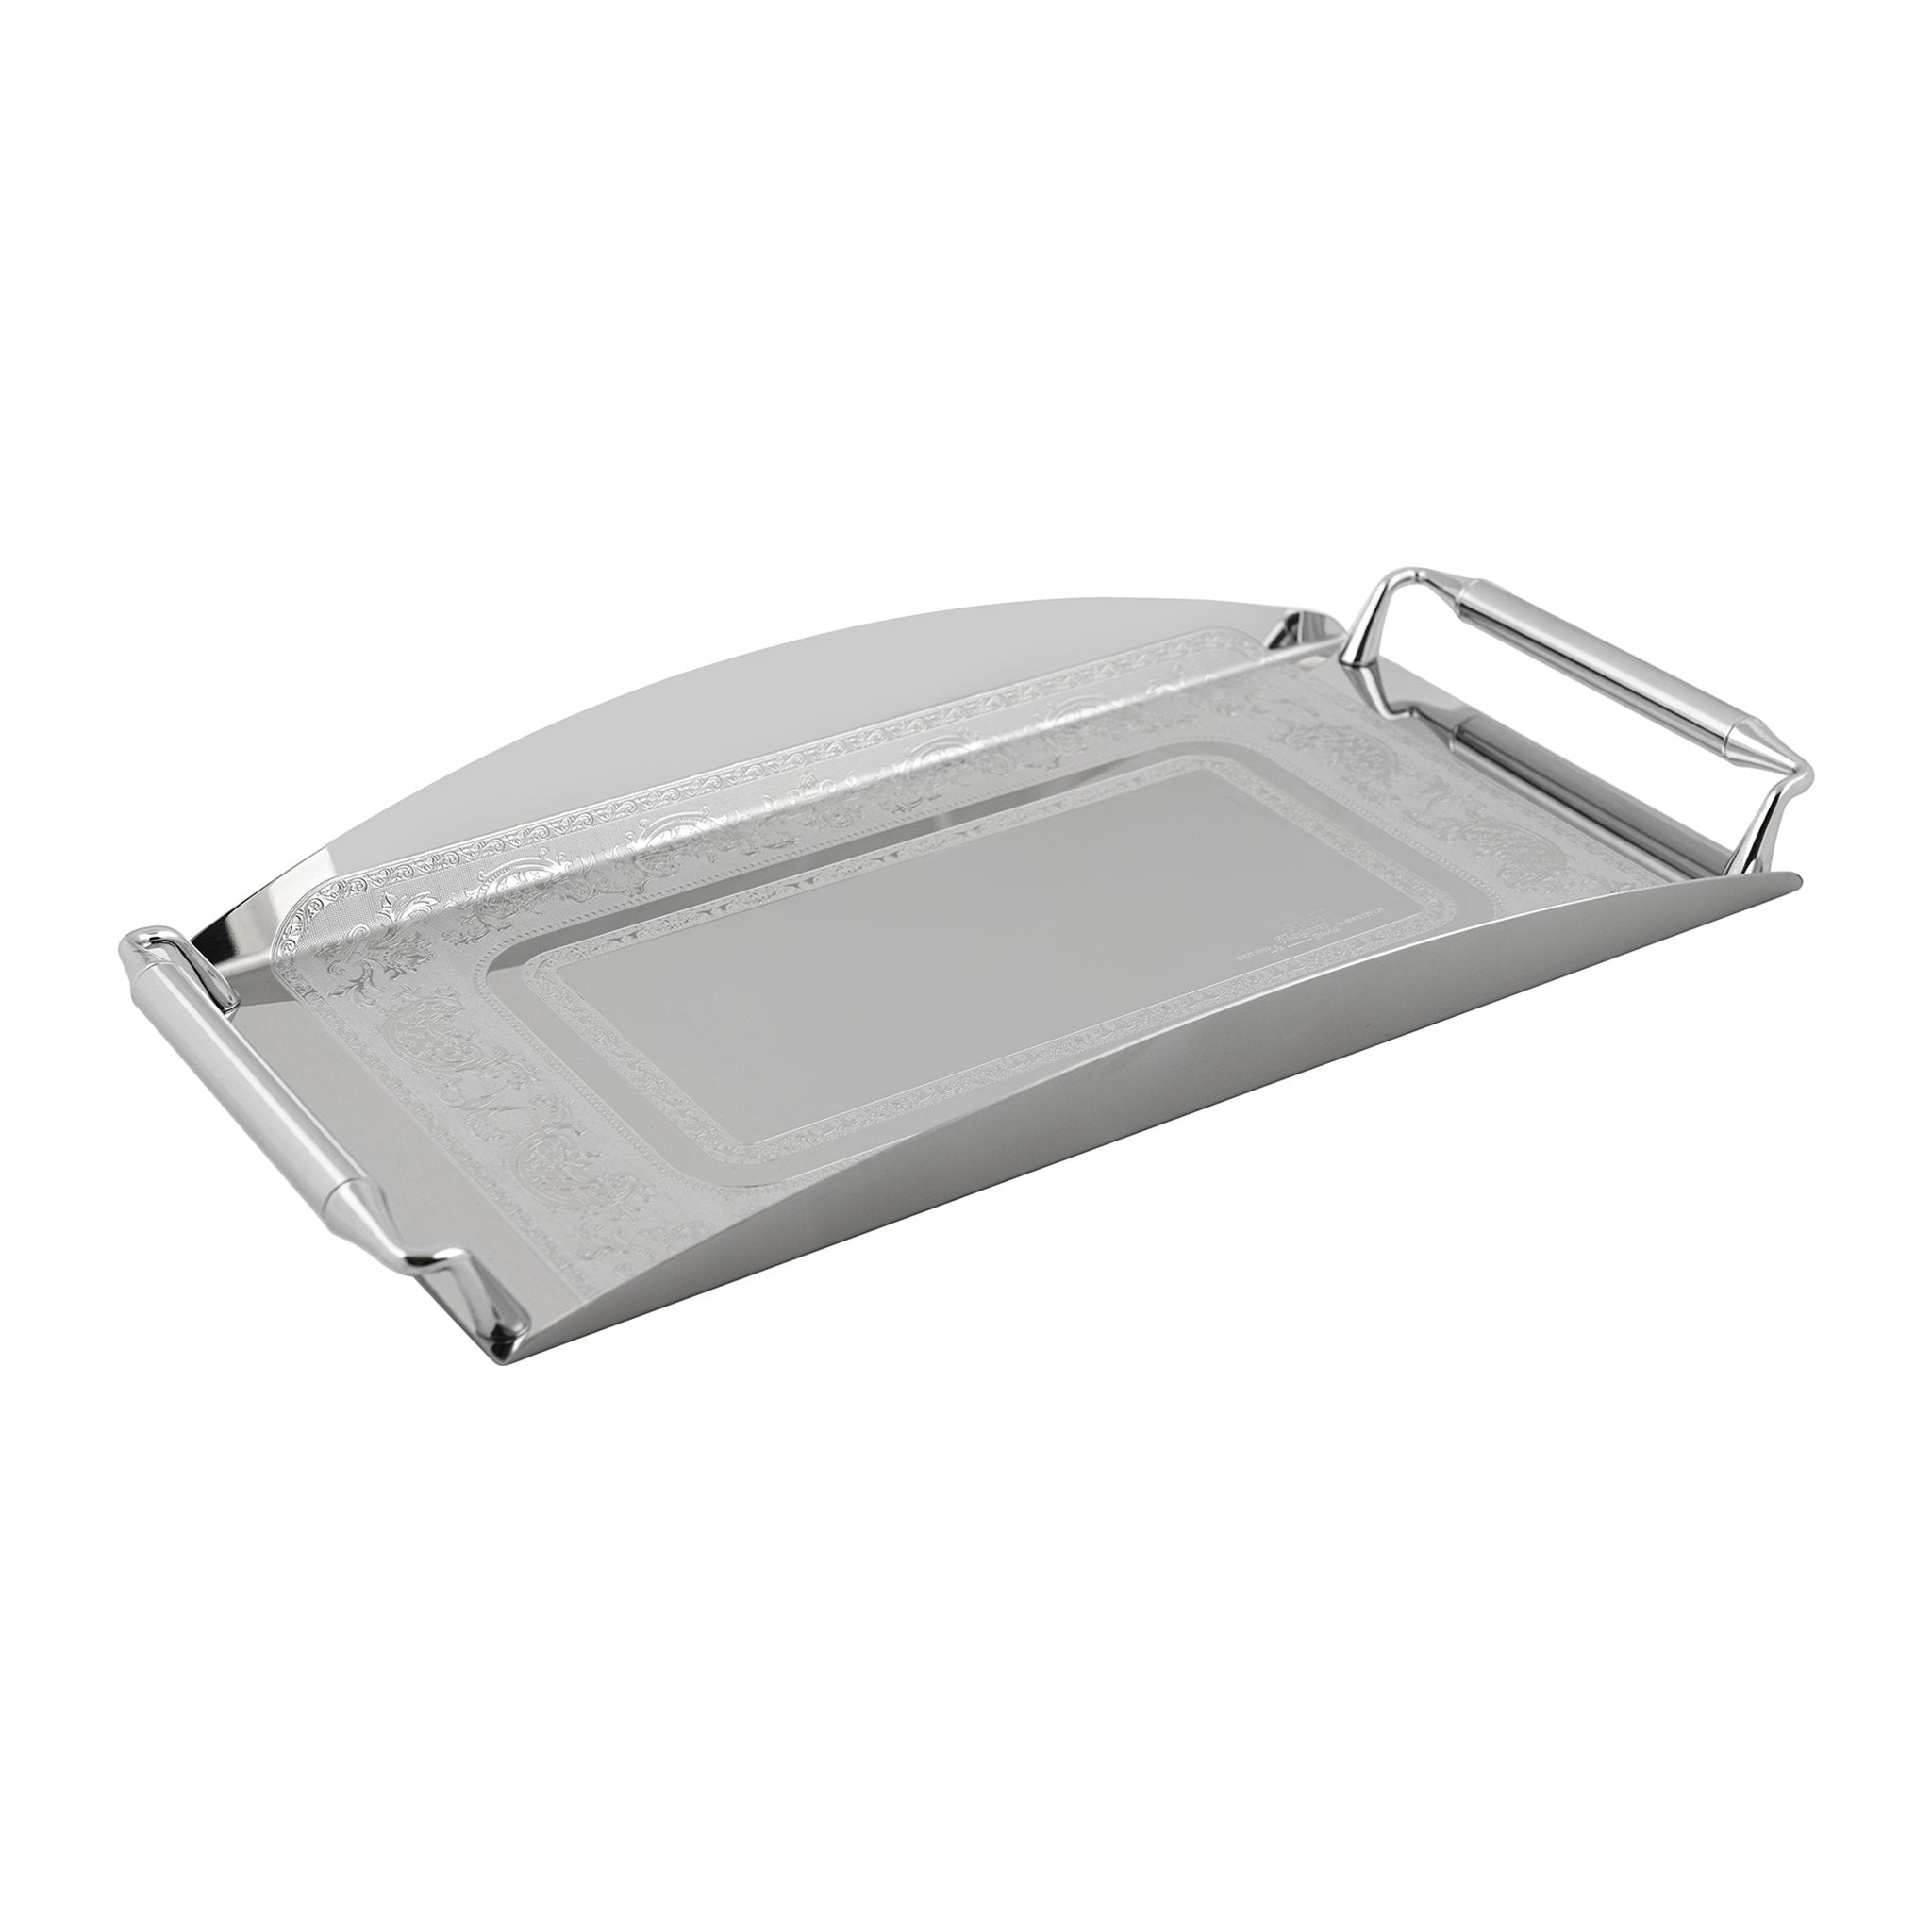 Elegant Gioiel - Rectangular Tray with Handles - Stainless Steel 18/10 - 40x25cm - 75000166